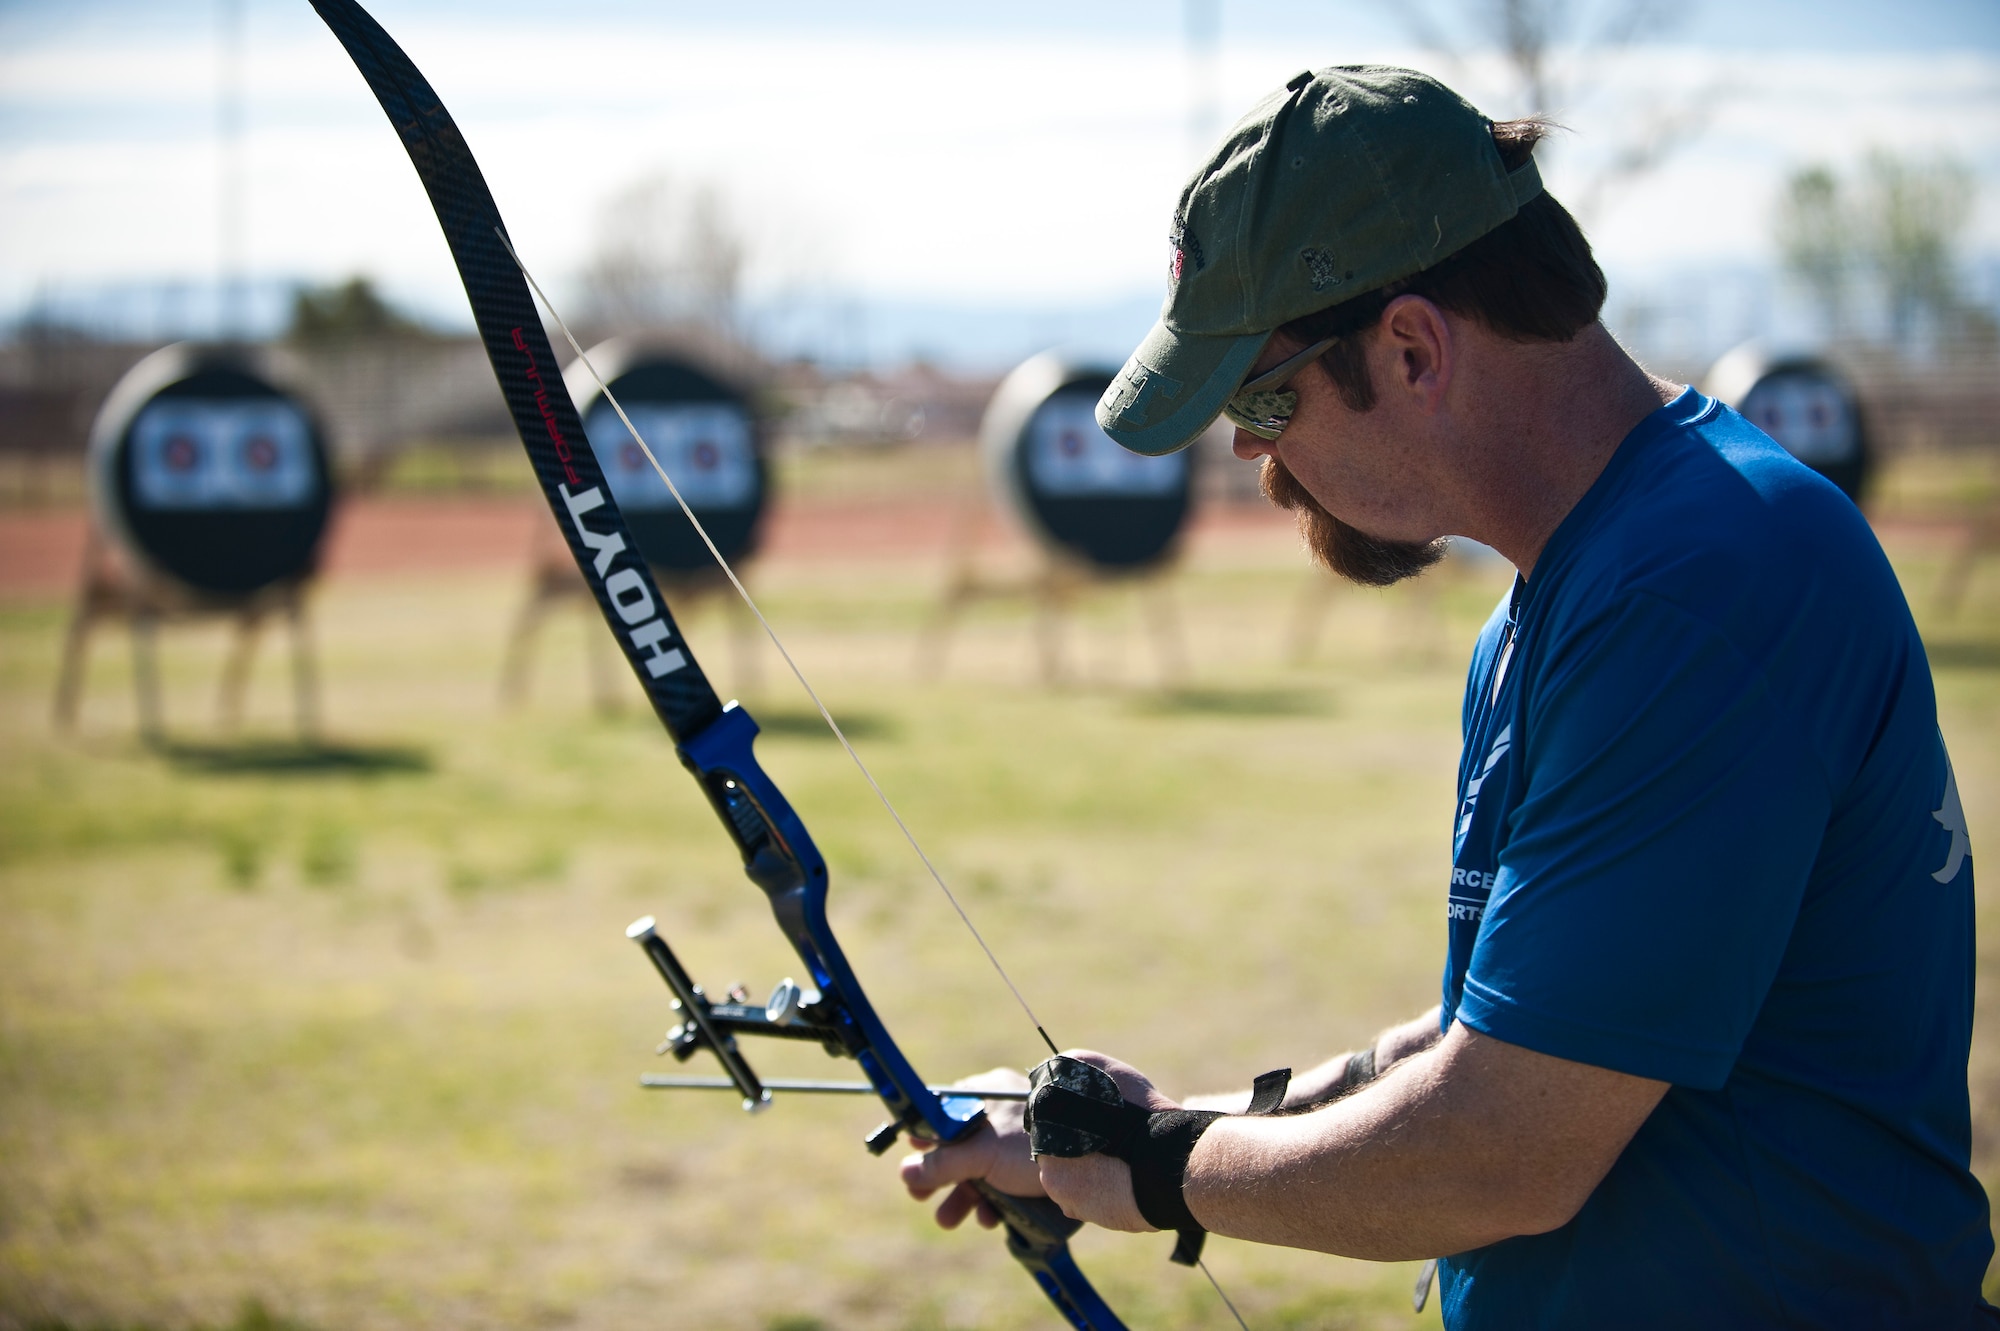 Retired U.S. Air Force Chief Master Sgt. Robert Zukauskas prepares to shoot a target during an archery practice session Feb. 27, 2015, at Nellis Air Force Base, Nev. Zukauskas is naturally right-handed, but has learned to shoot archery left-handed after sustaining multiple injuries to the right side of his body during a deployment to Iraq in 2009. (U.S. Air Force photo/Staff Sgt. Siuta B. Ika)